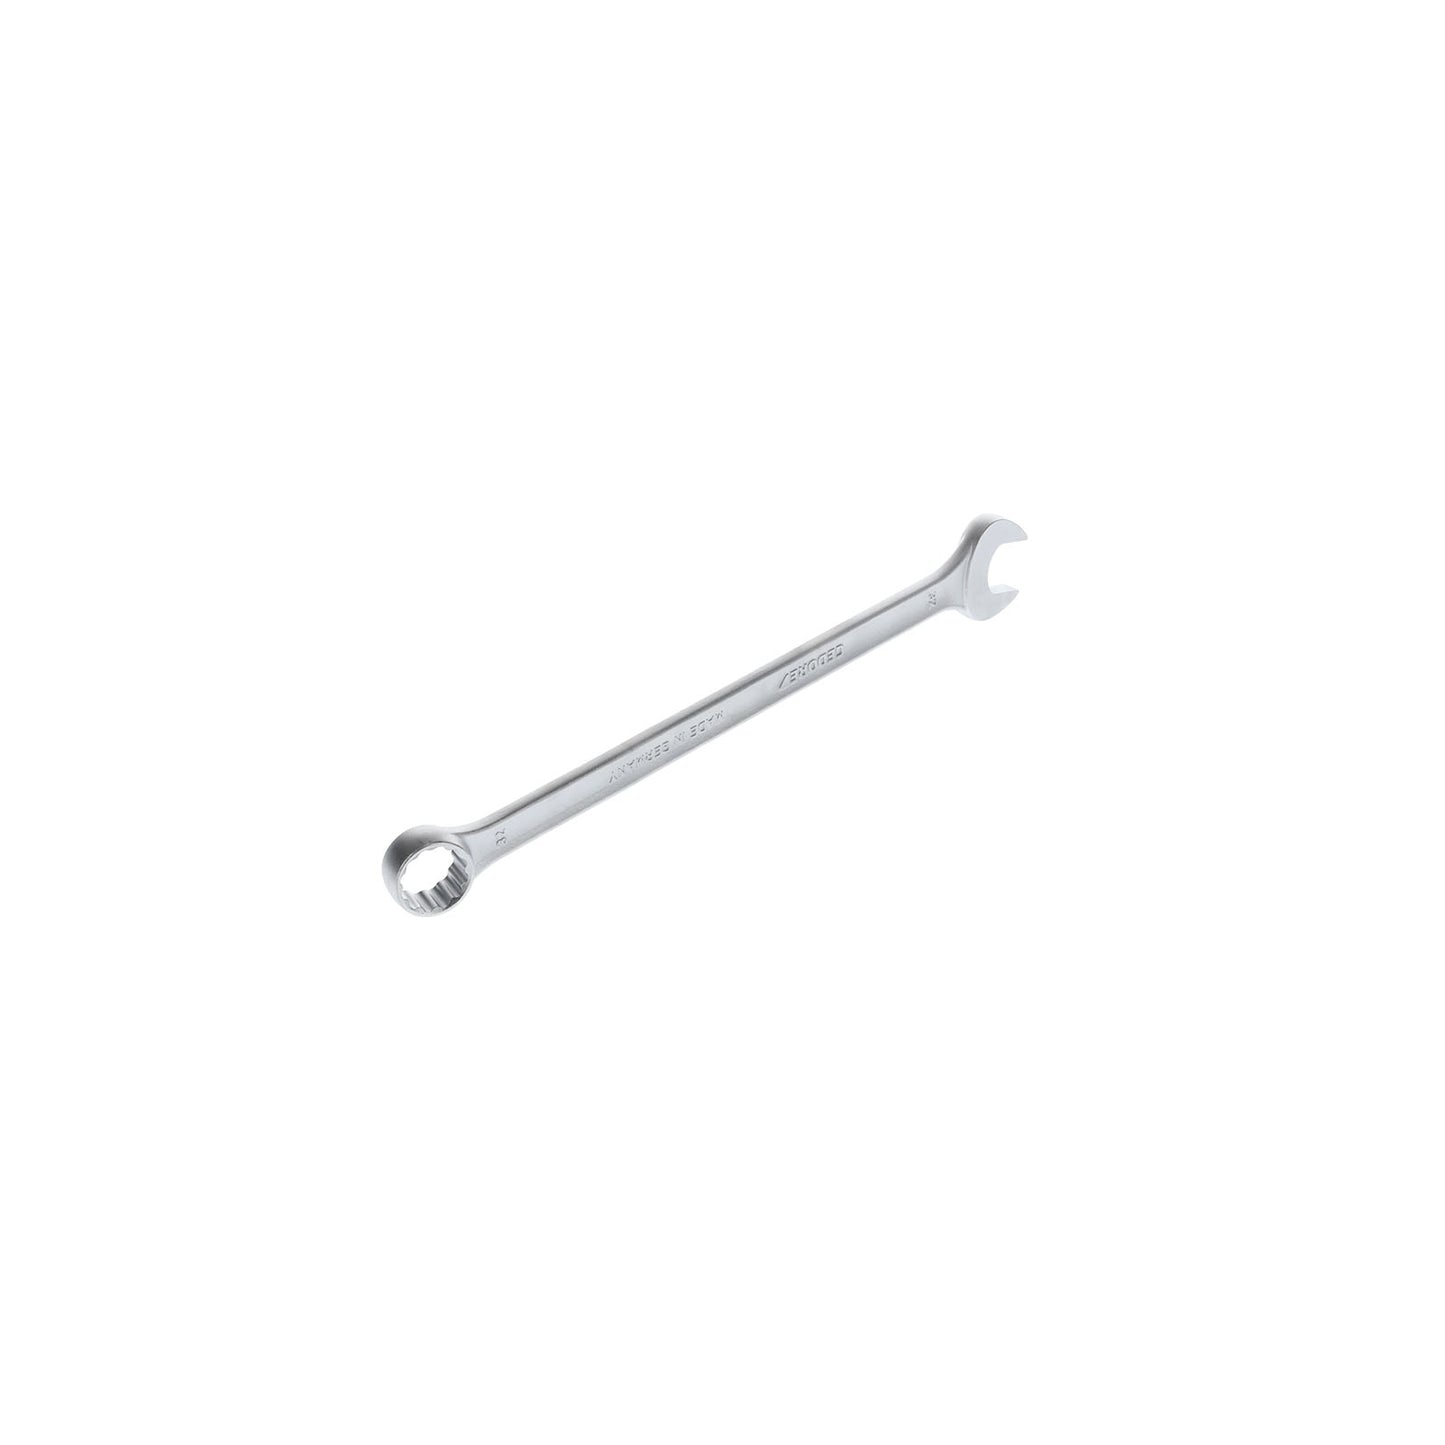 GEDORE 7 XL 32 - XL Combination Wrench, 32 mm (6101430)